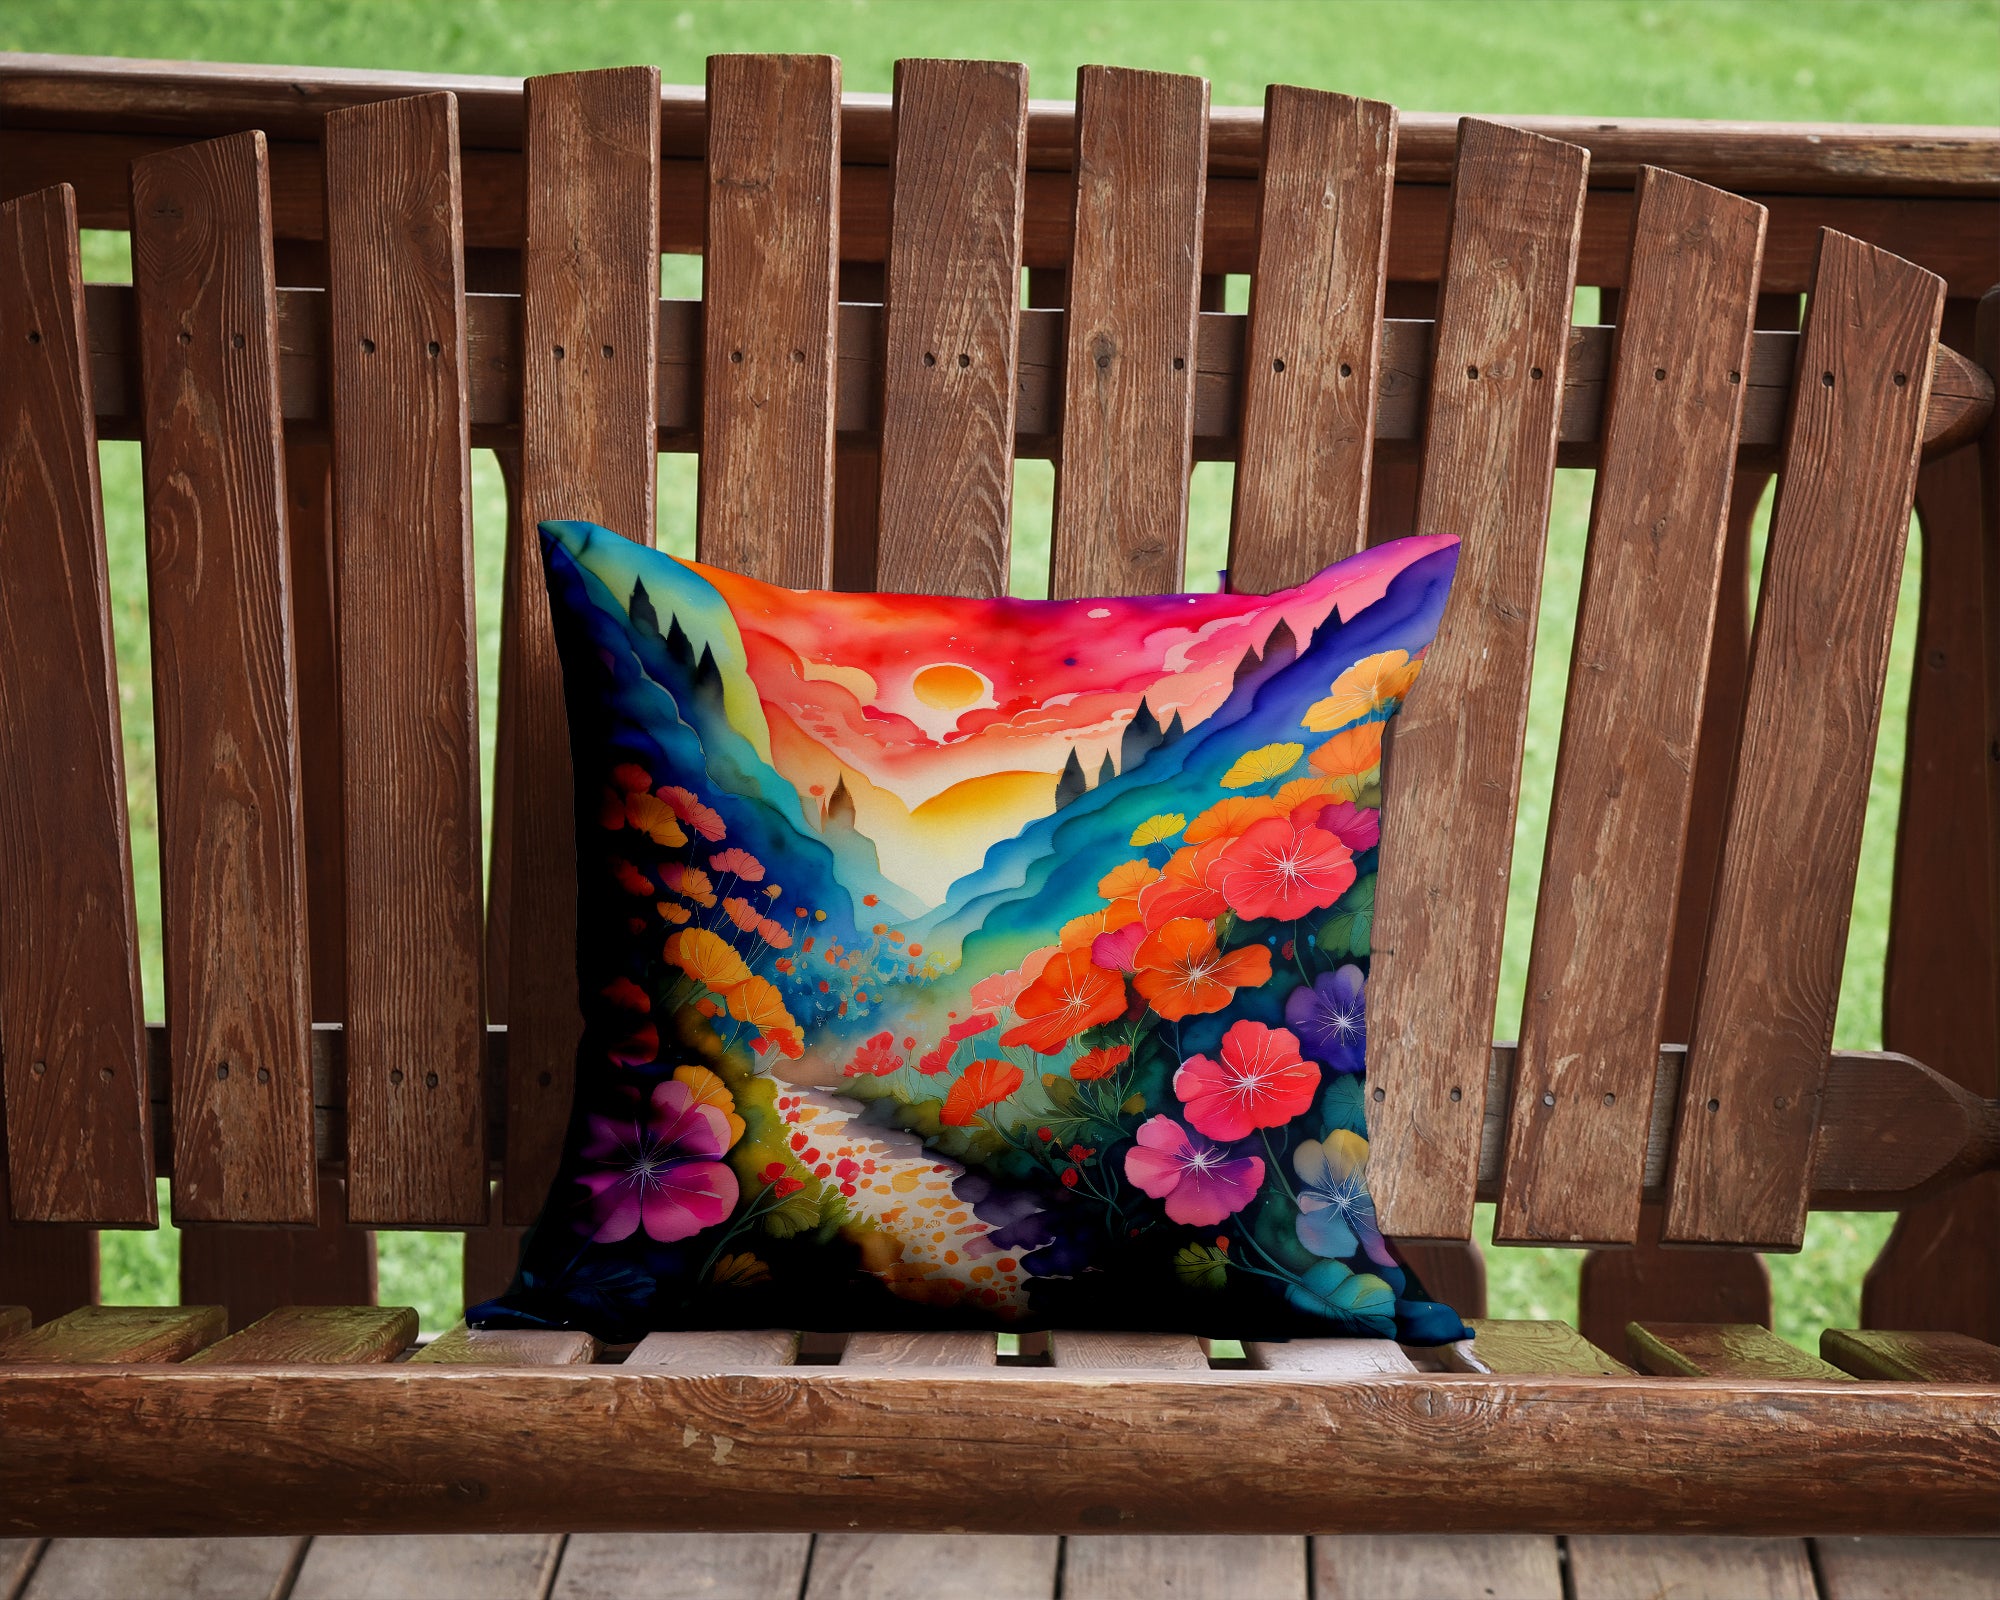 Buy this Colorful Geraniums Fabric Decorative Pillow